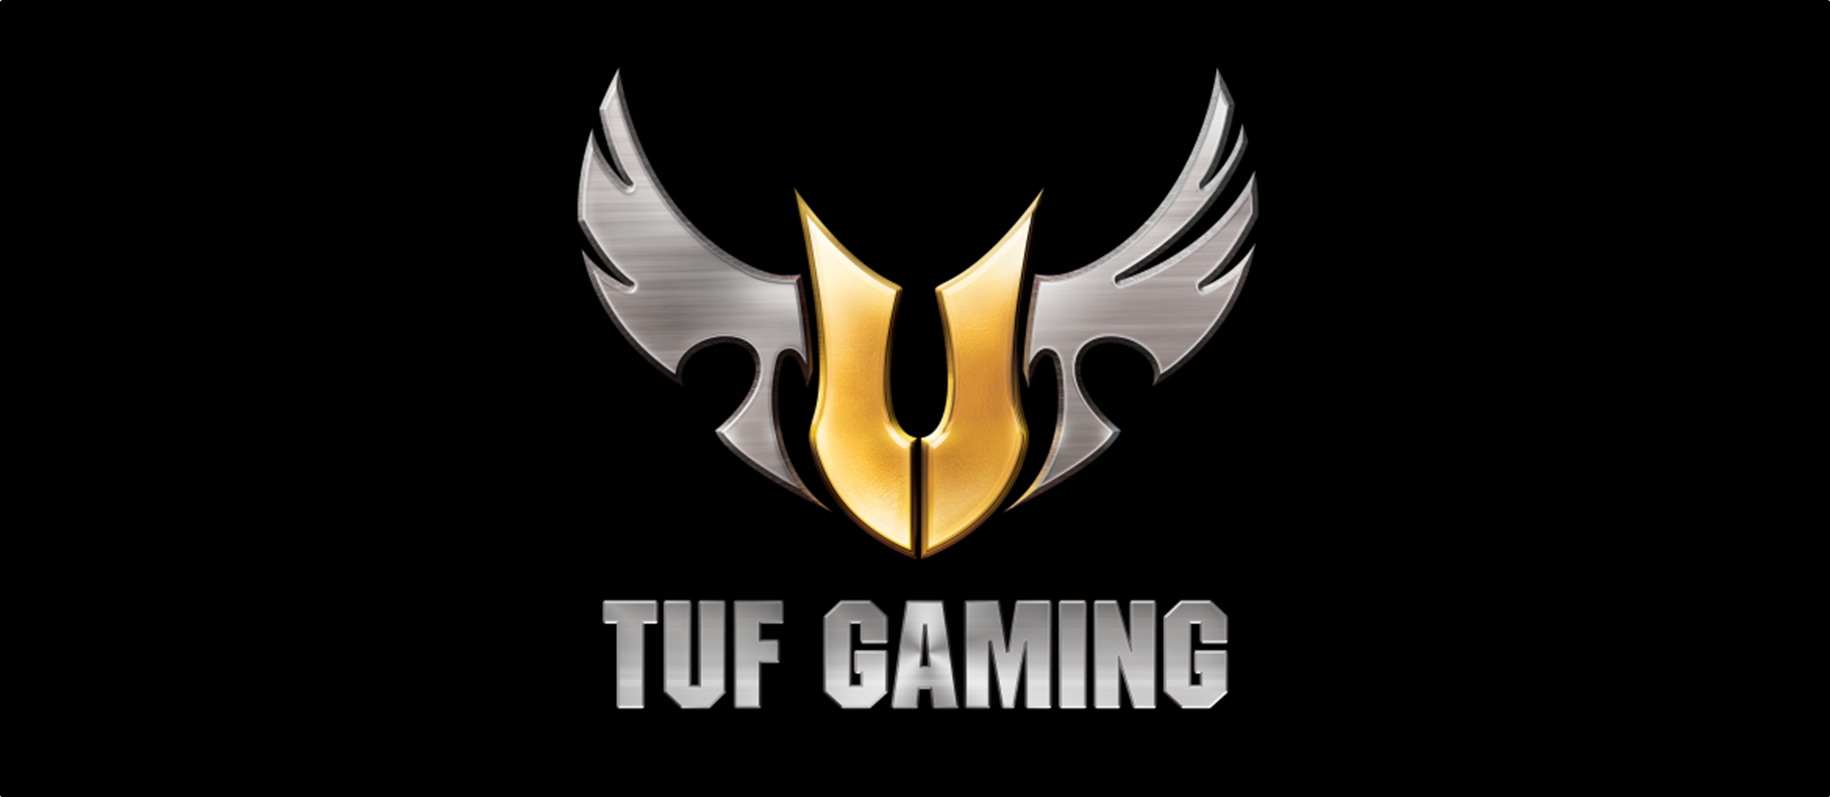 Asus introduces the FX505 and FX705 to the TUF Gaming family - KLGadgetGuy